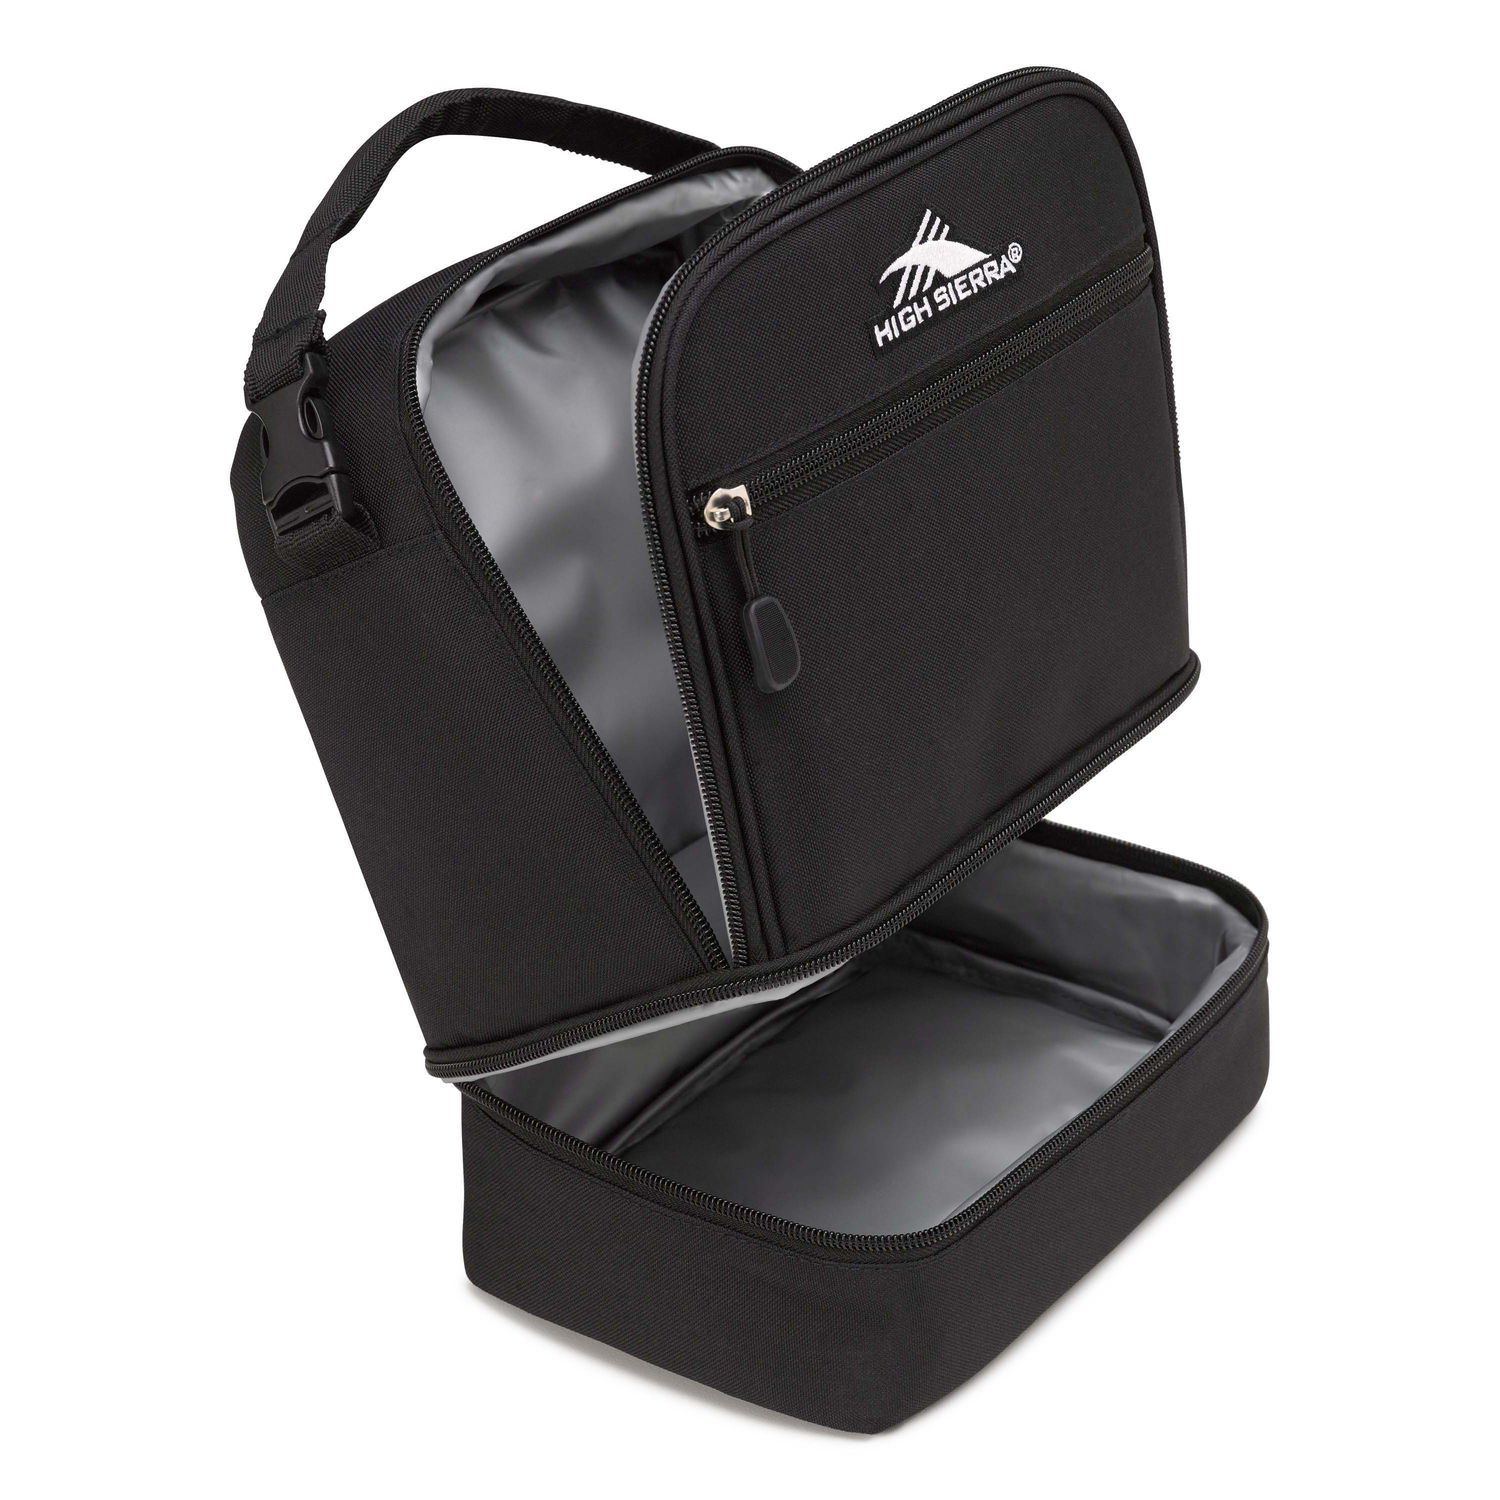 High Sierra Stacked Compartment Lunch Bag - Black